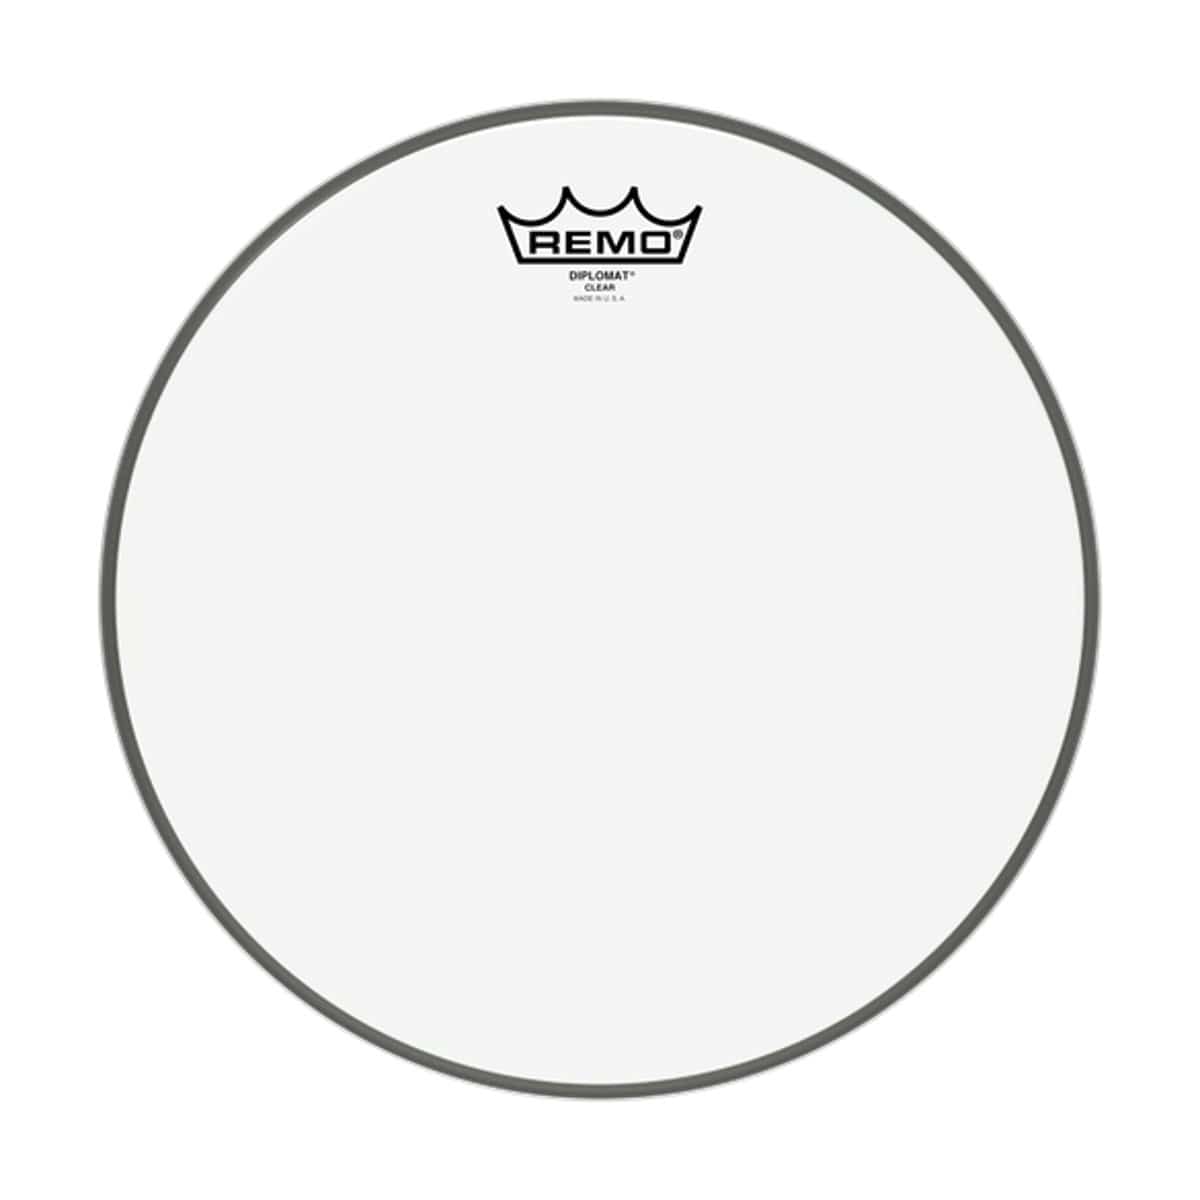 Remo Percussion Remo 12 Inch Drum Head Diplomat Clear BD-0312-00 - Byron Music